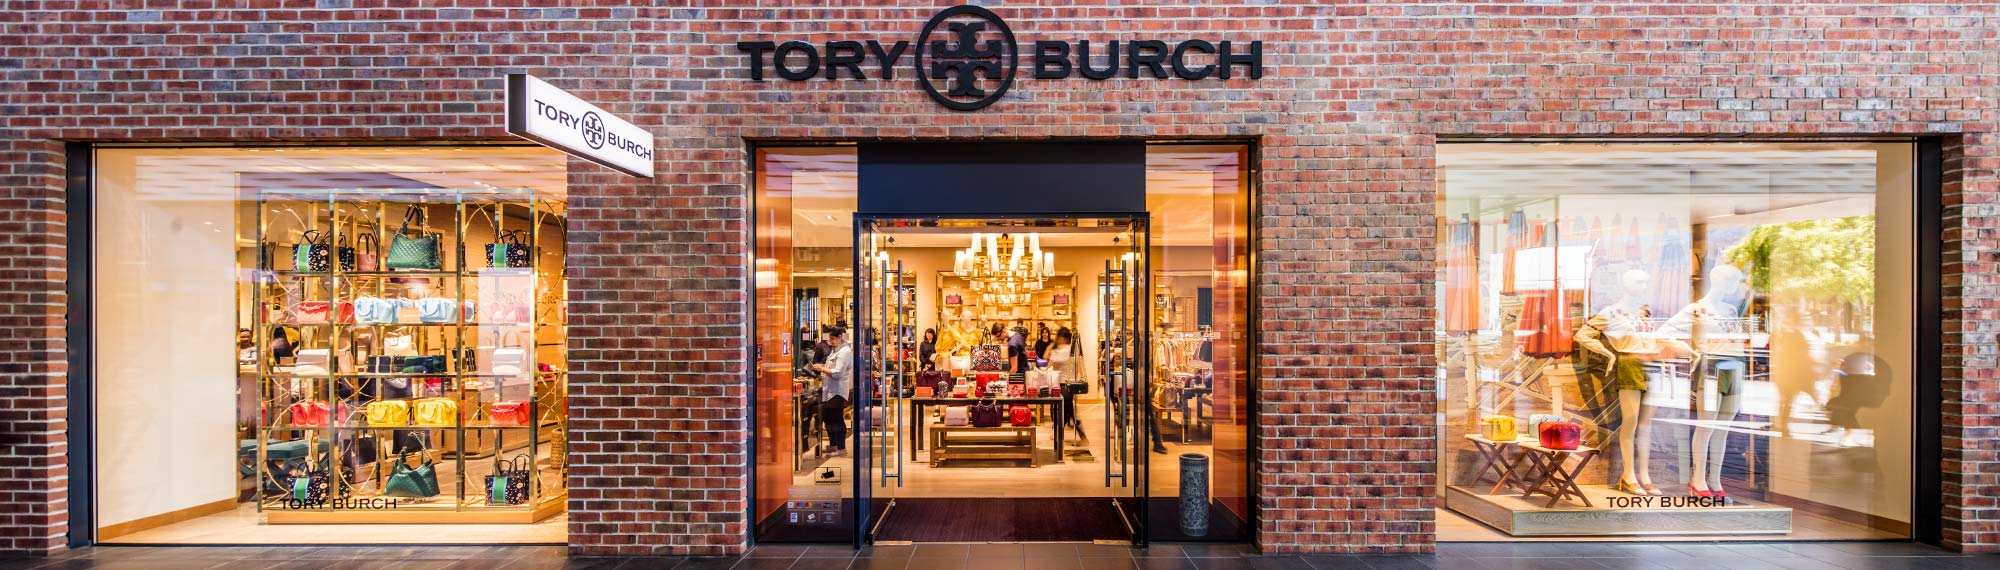 Tory burch outlet